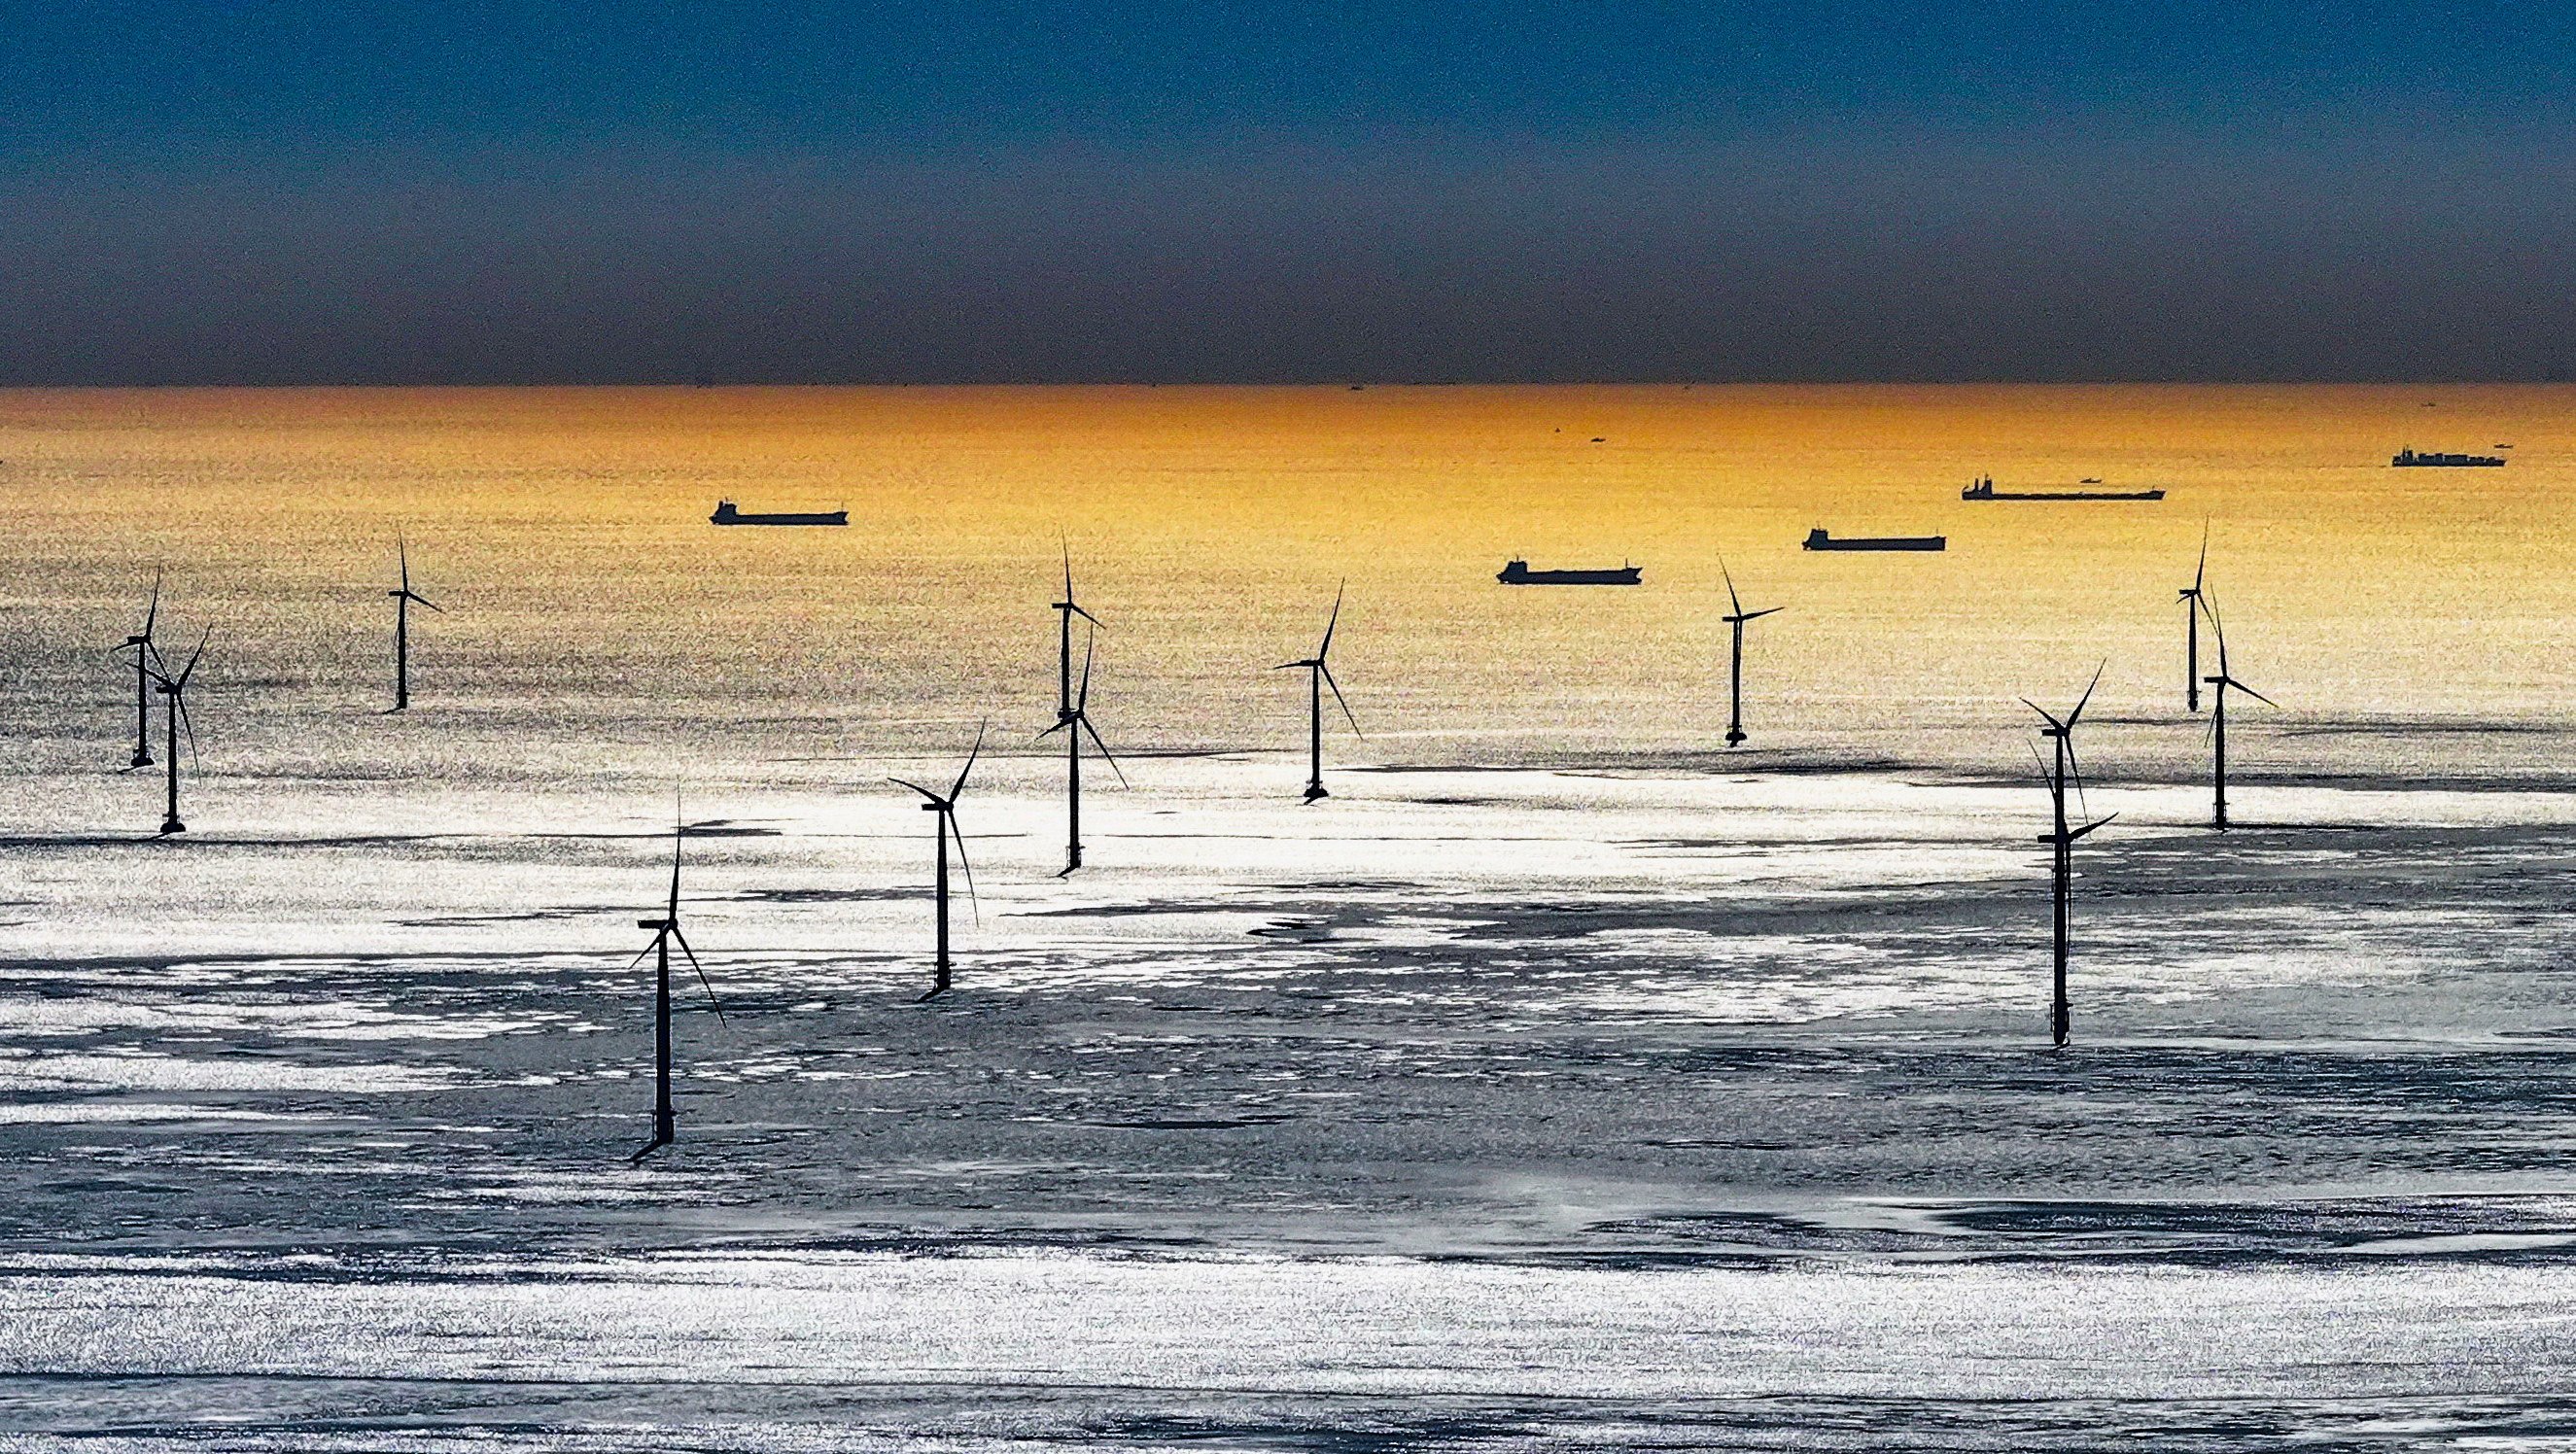 (231223) -- TANGSHAN, Dec. 23, 2023 (Xinhua) -- This aerial photo taken on Dec. 22, 2023 shows an offshore wind farm in Tangshan City, north China’s Hebei Province. In recent years, Tangshan City in Hebei Province encouraged the development of clean energy and promoted the construction of wind and solar power plants. By far, the installed capacity of clean energy in Tangshan reached 3.242 million kilowatts. (Xinhua/Yang Shiyao)